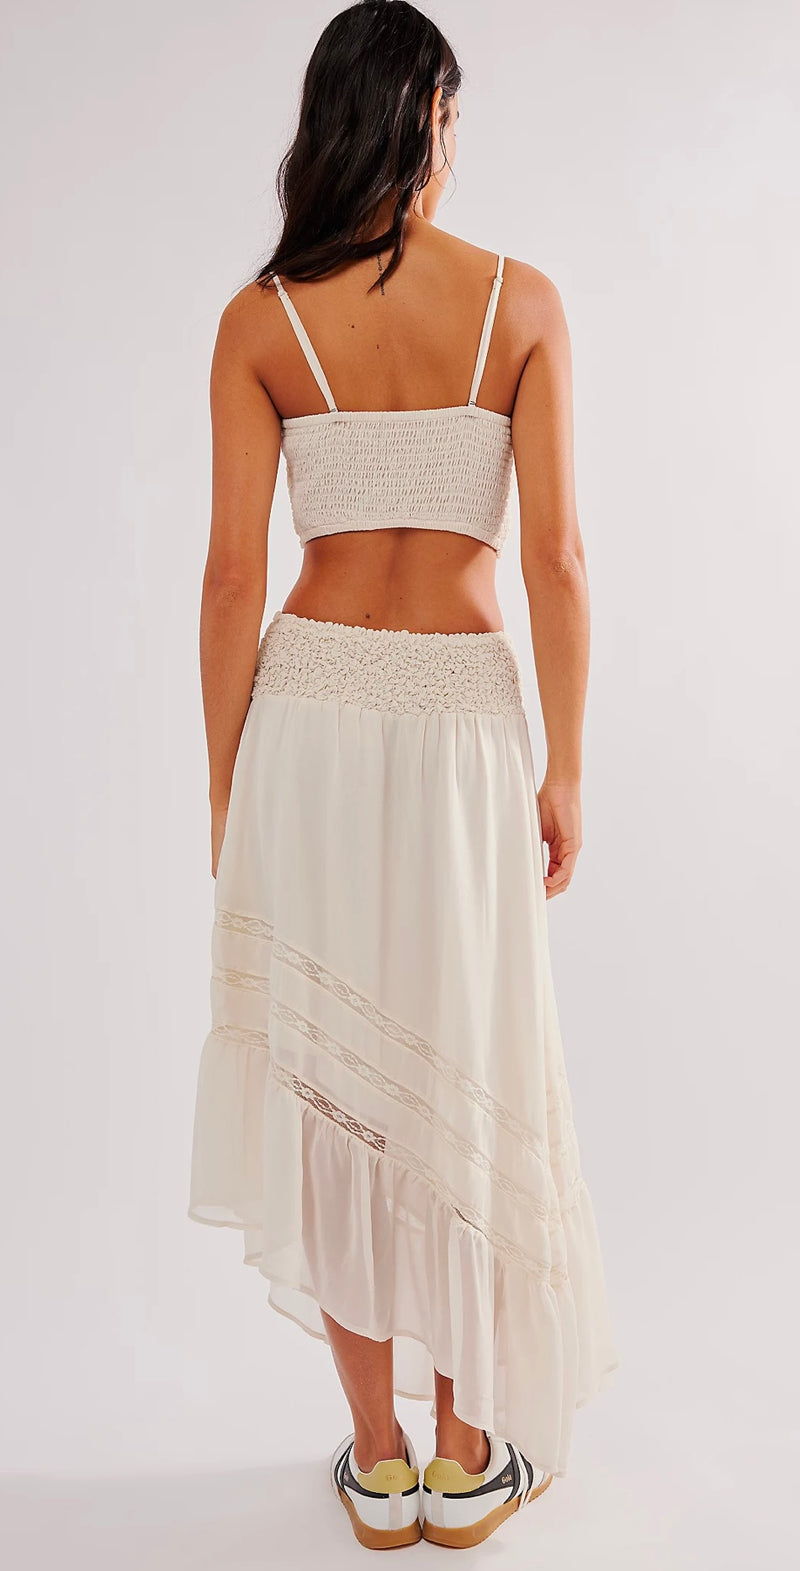 Augusta Top and Skirt set by Free People